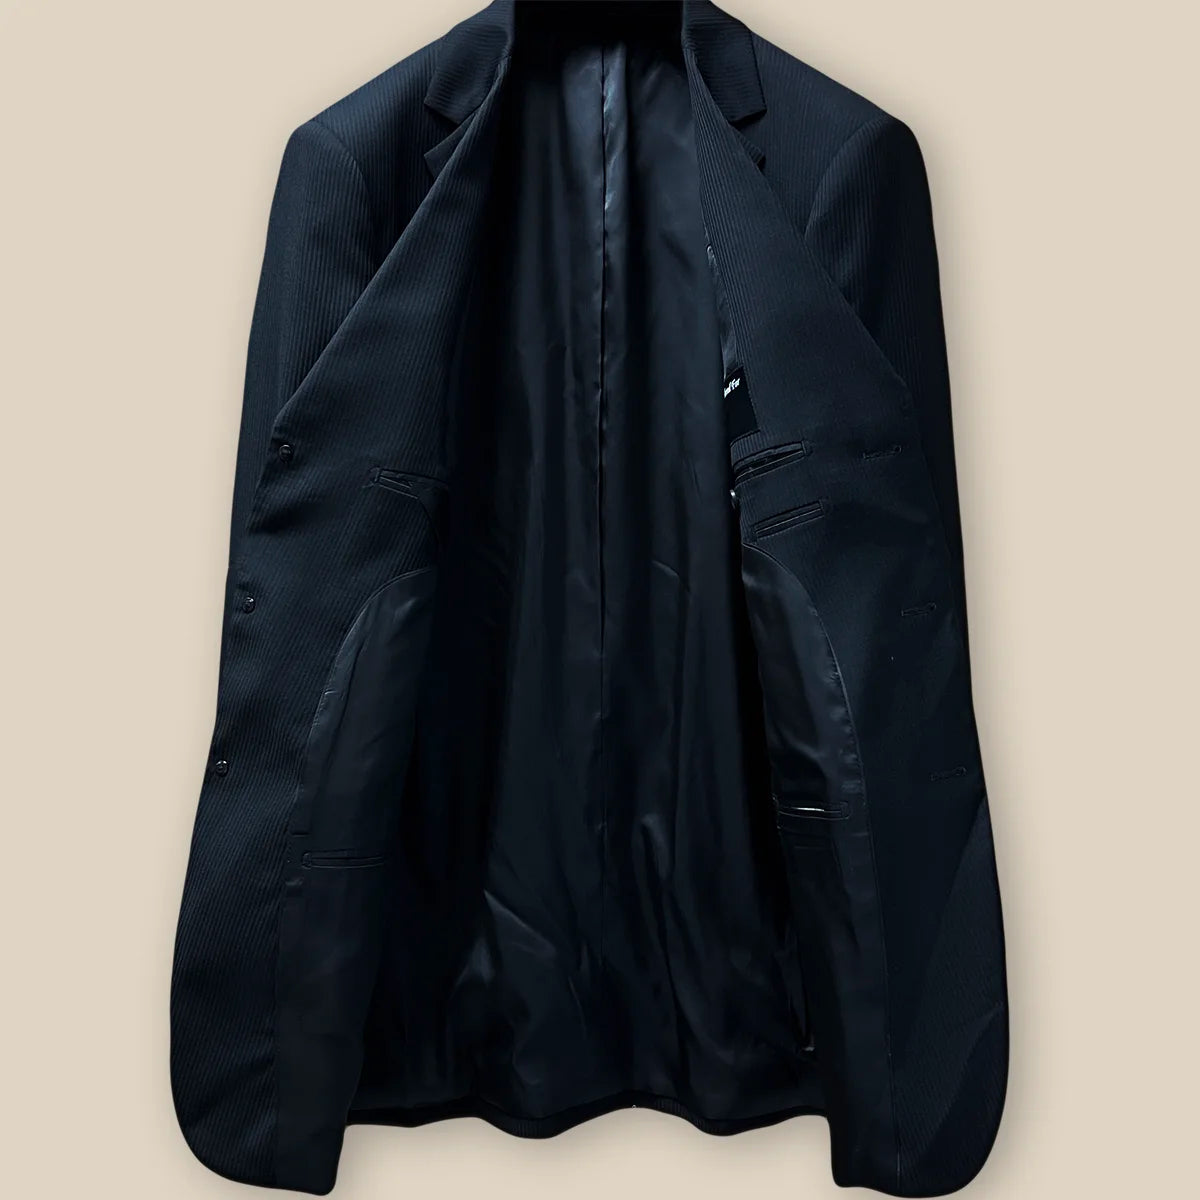 Interior view of the jacket, highlighting the luxurious black Bemberg lining and craftsmanship.